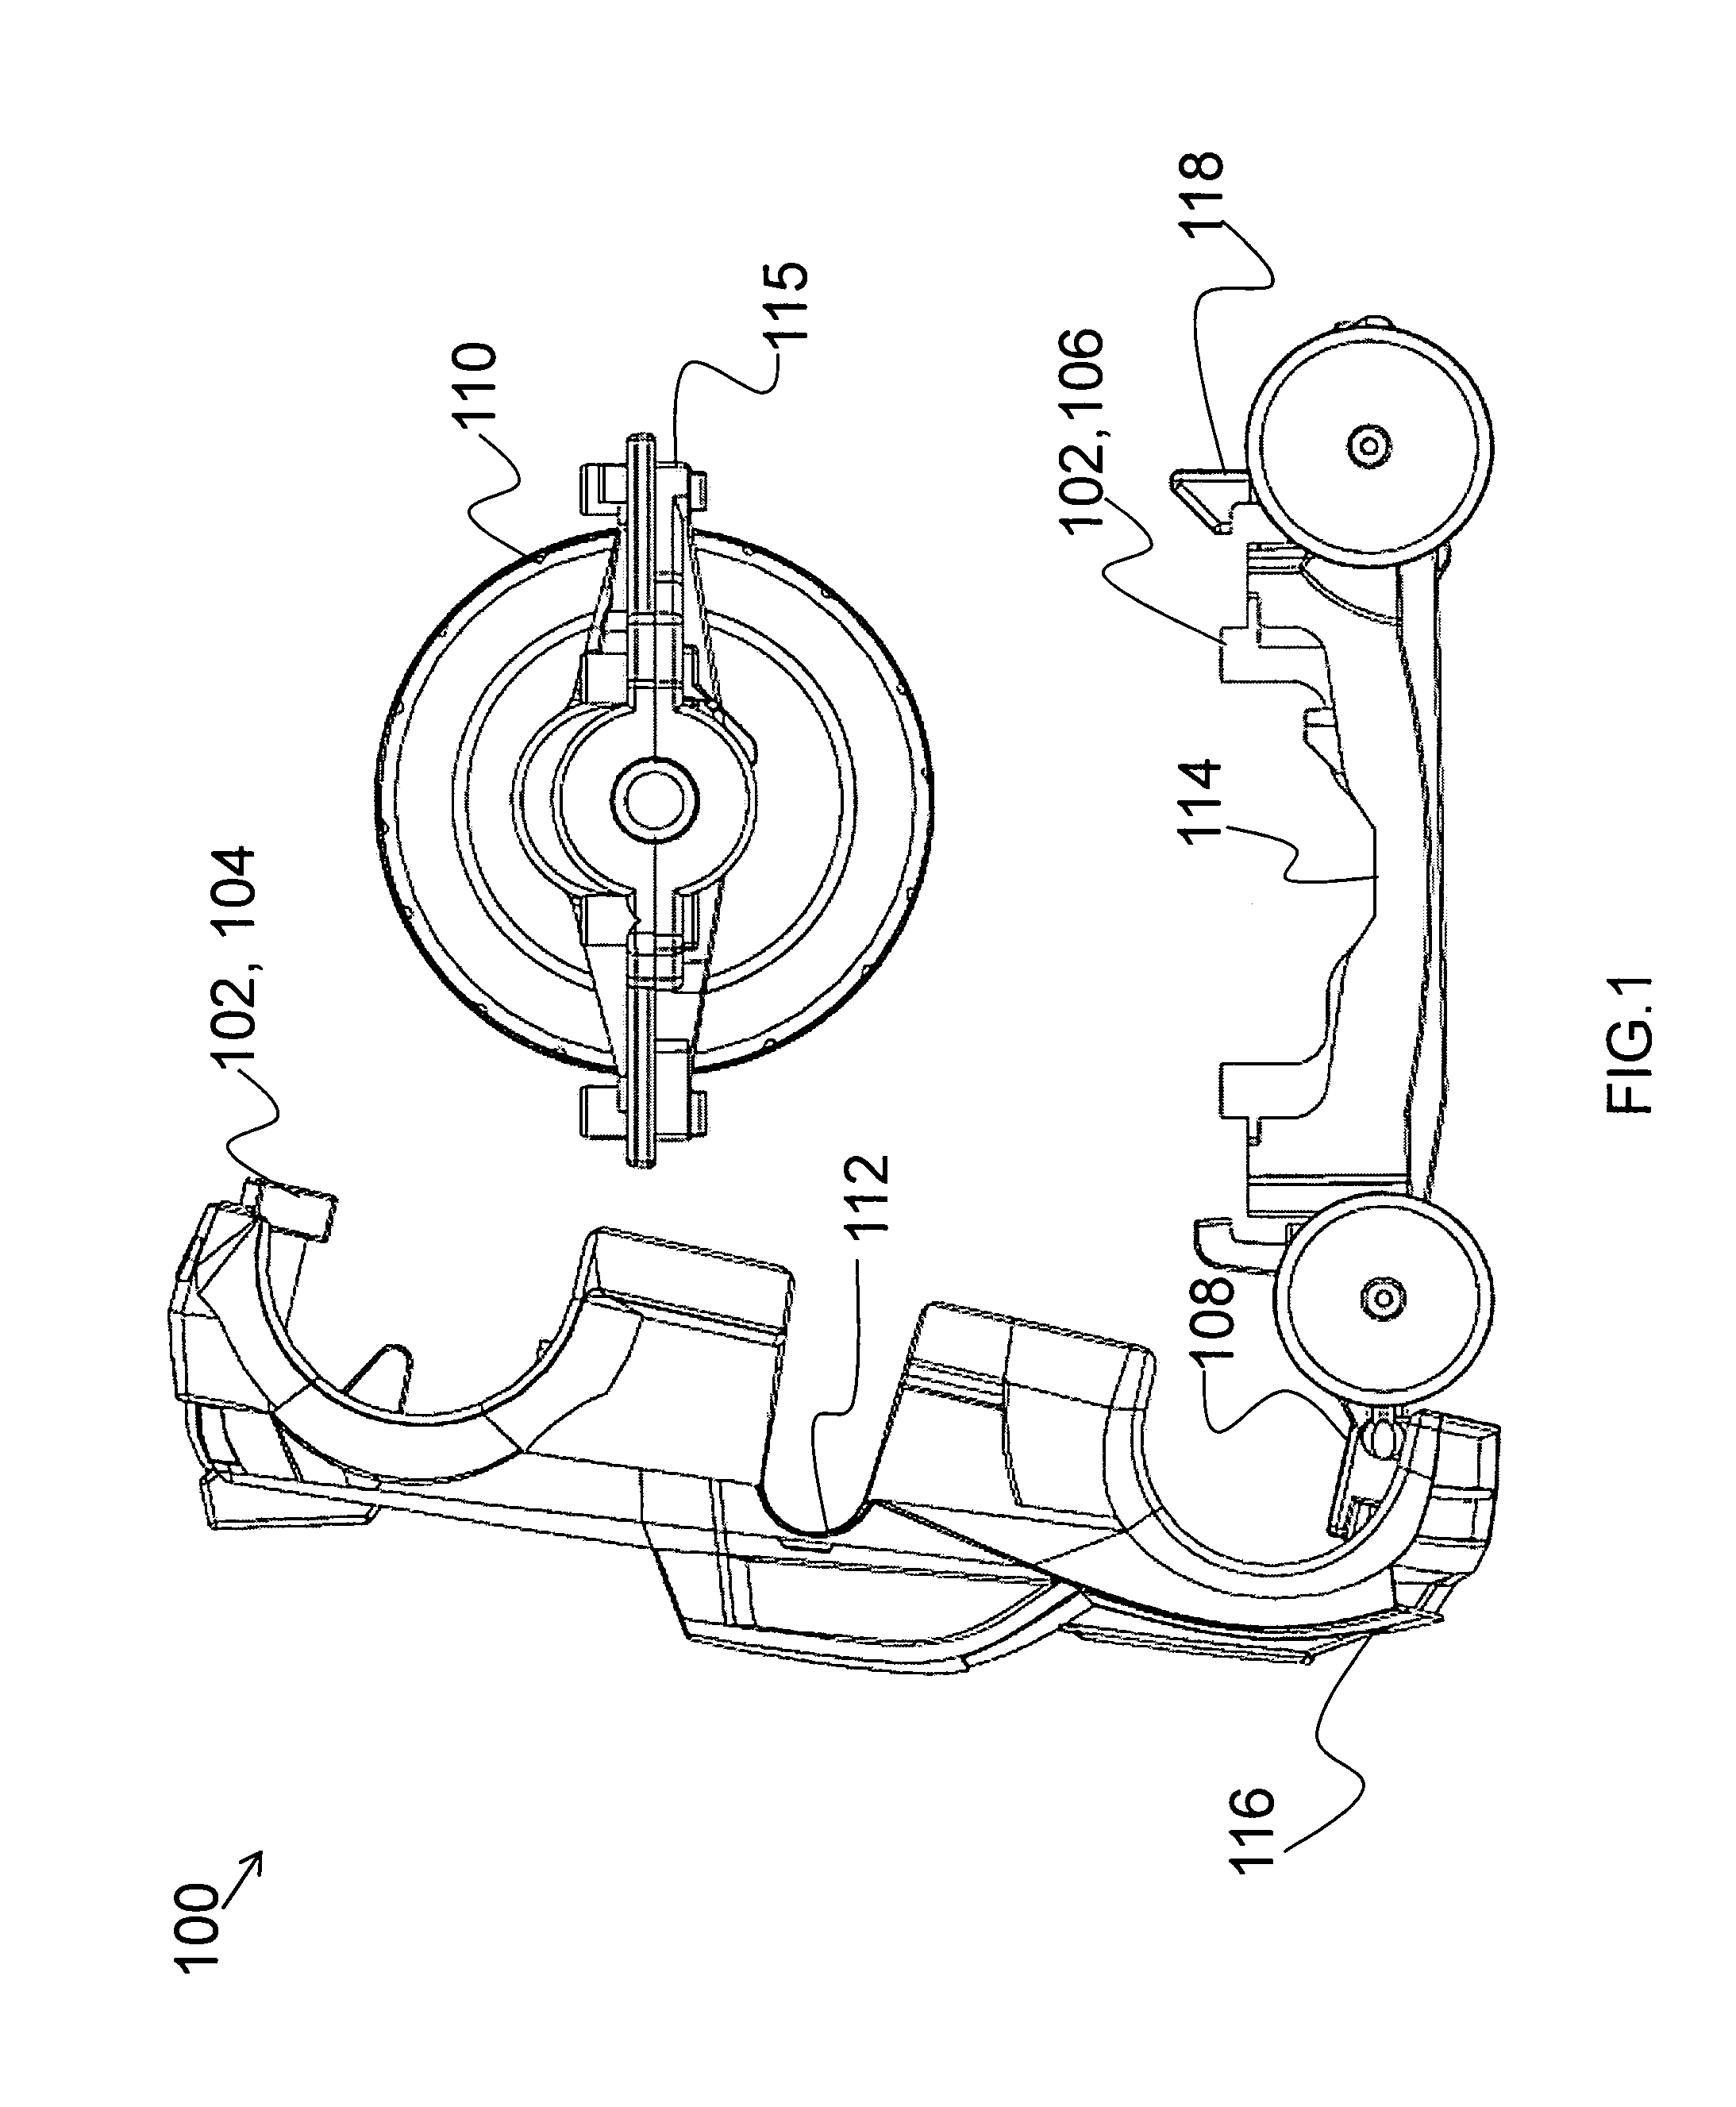 Track set with taut filament for use with a toy vehicle